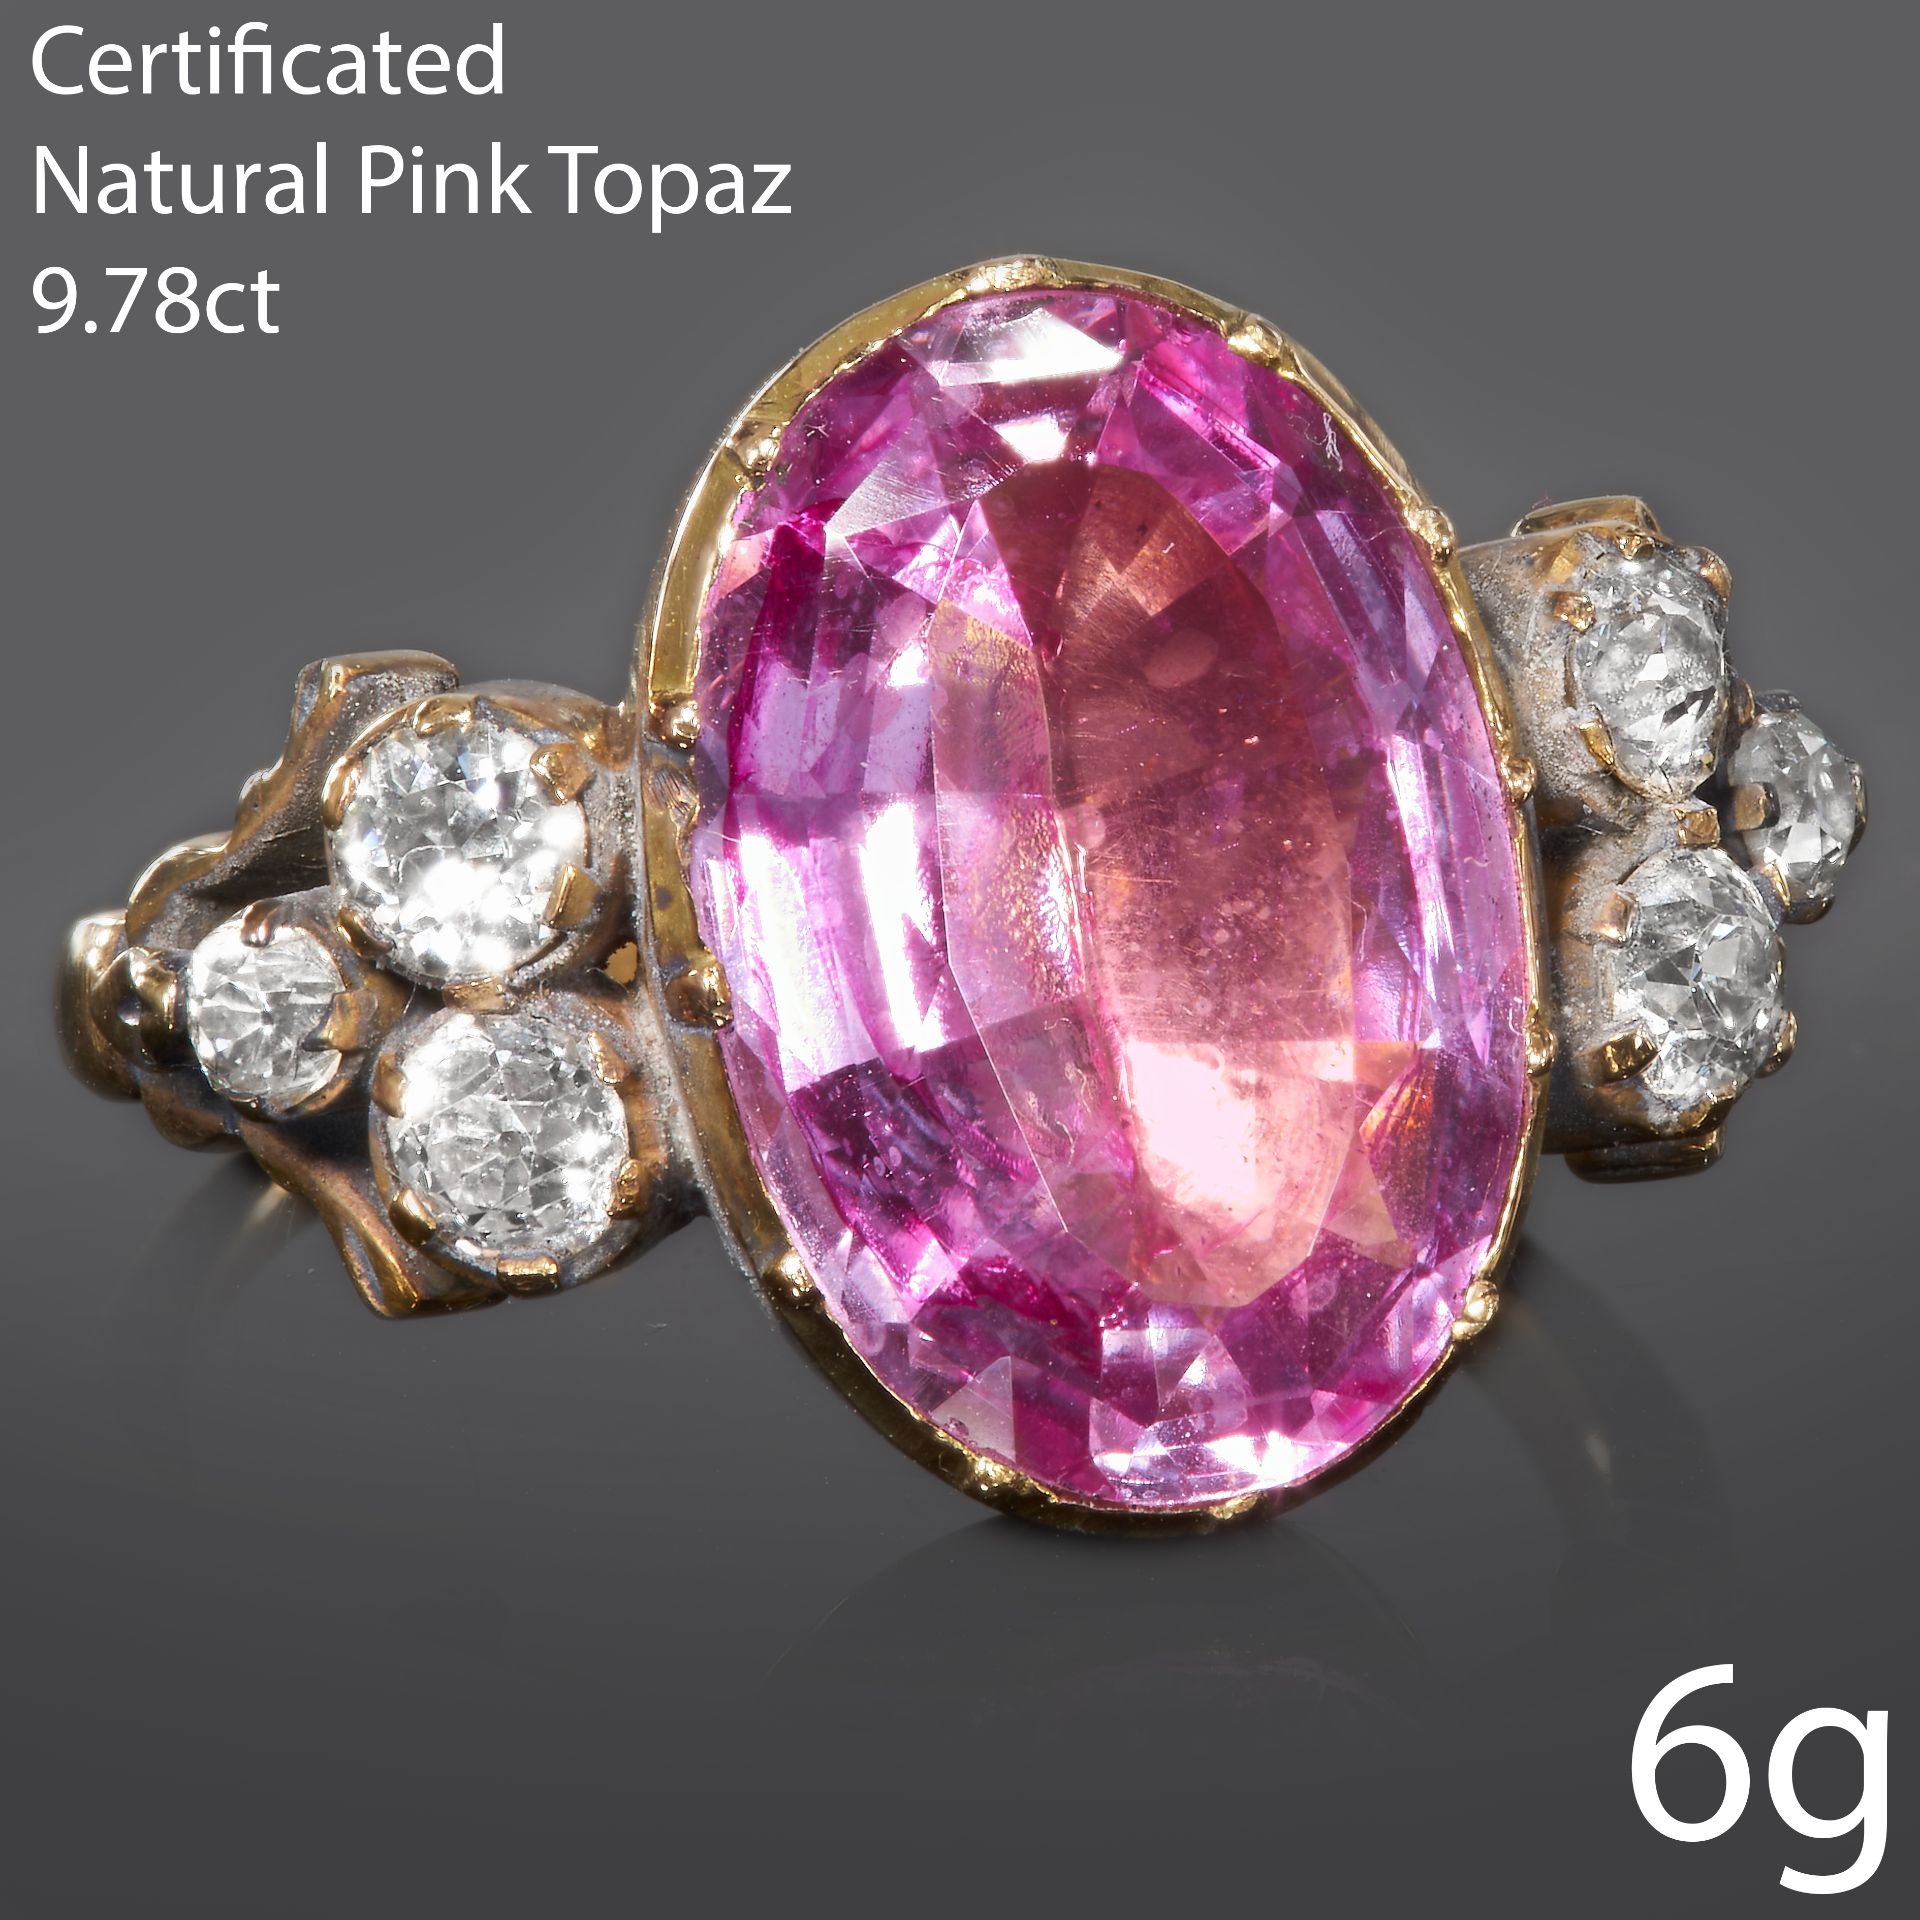 CERTIFICATED PINK TOPAZ AND DIAMOND RING